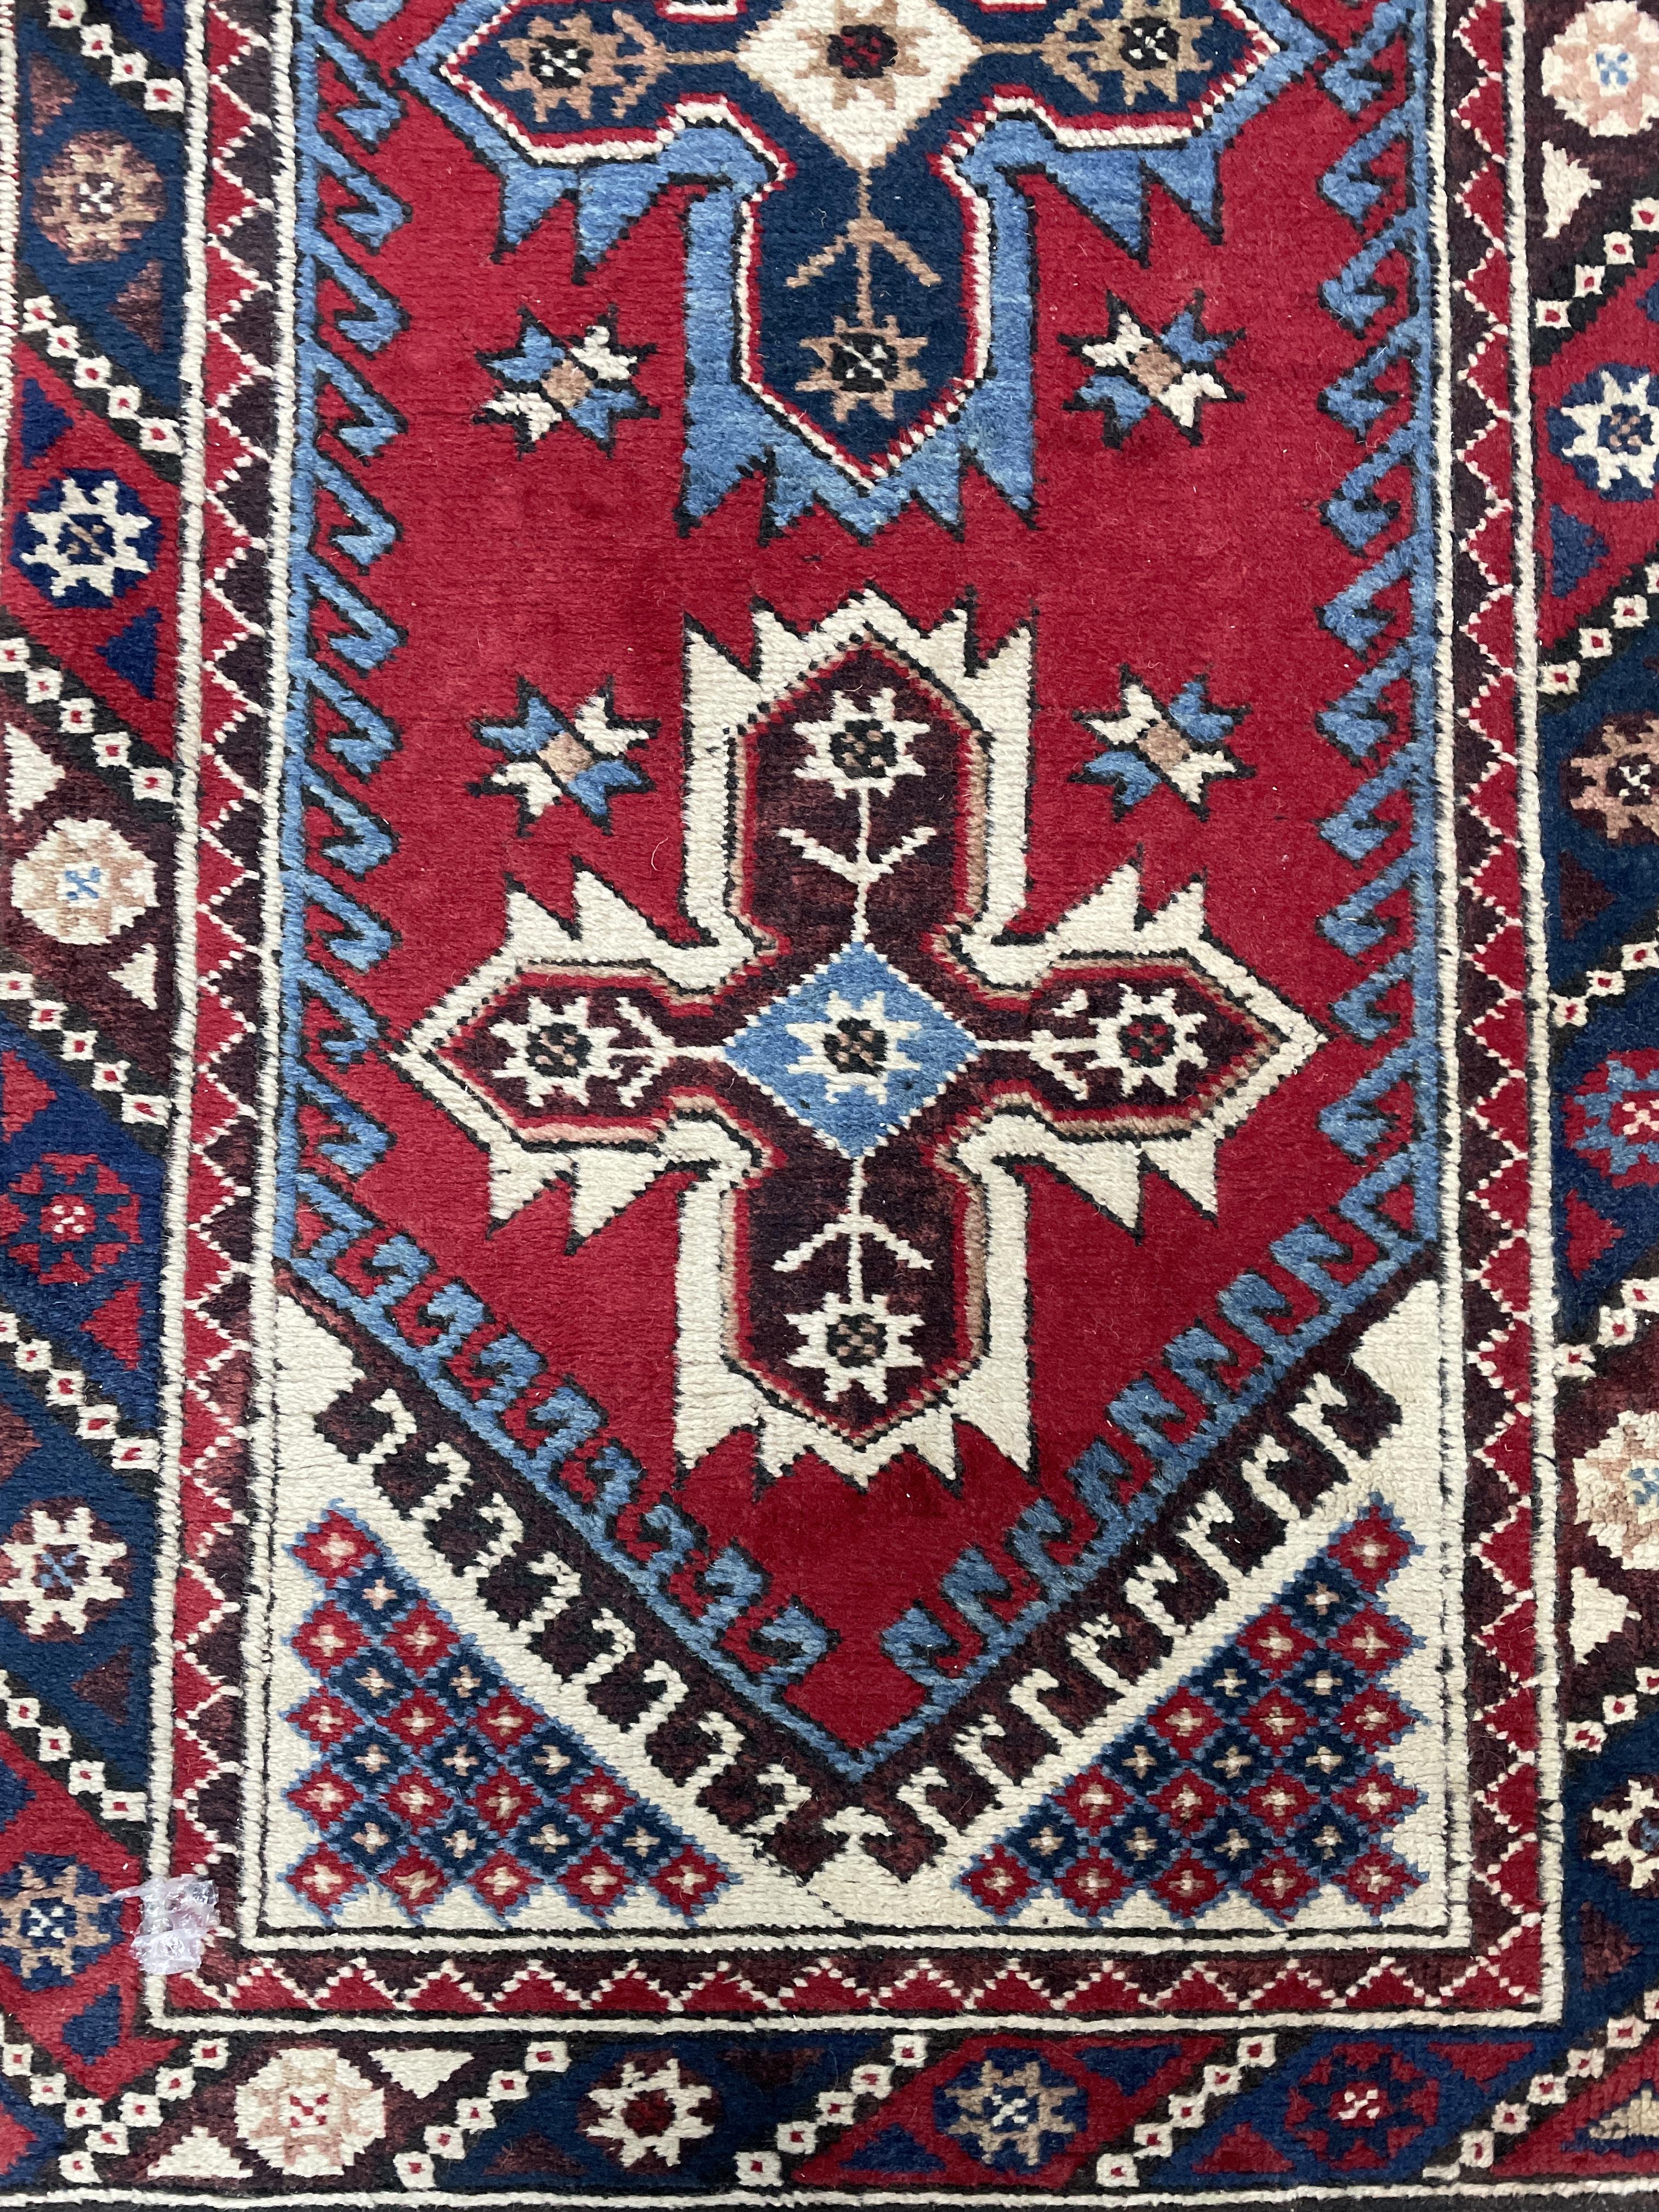 A MIDDLE EASTERN FRINGED AND BORDERED RUNNER AND A RUG